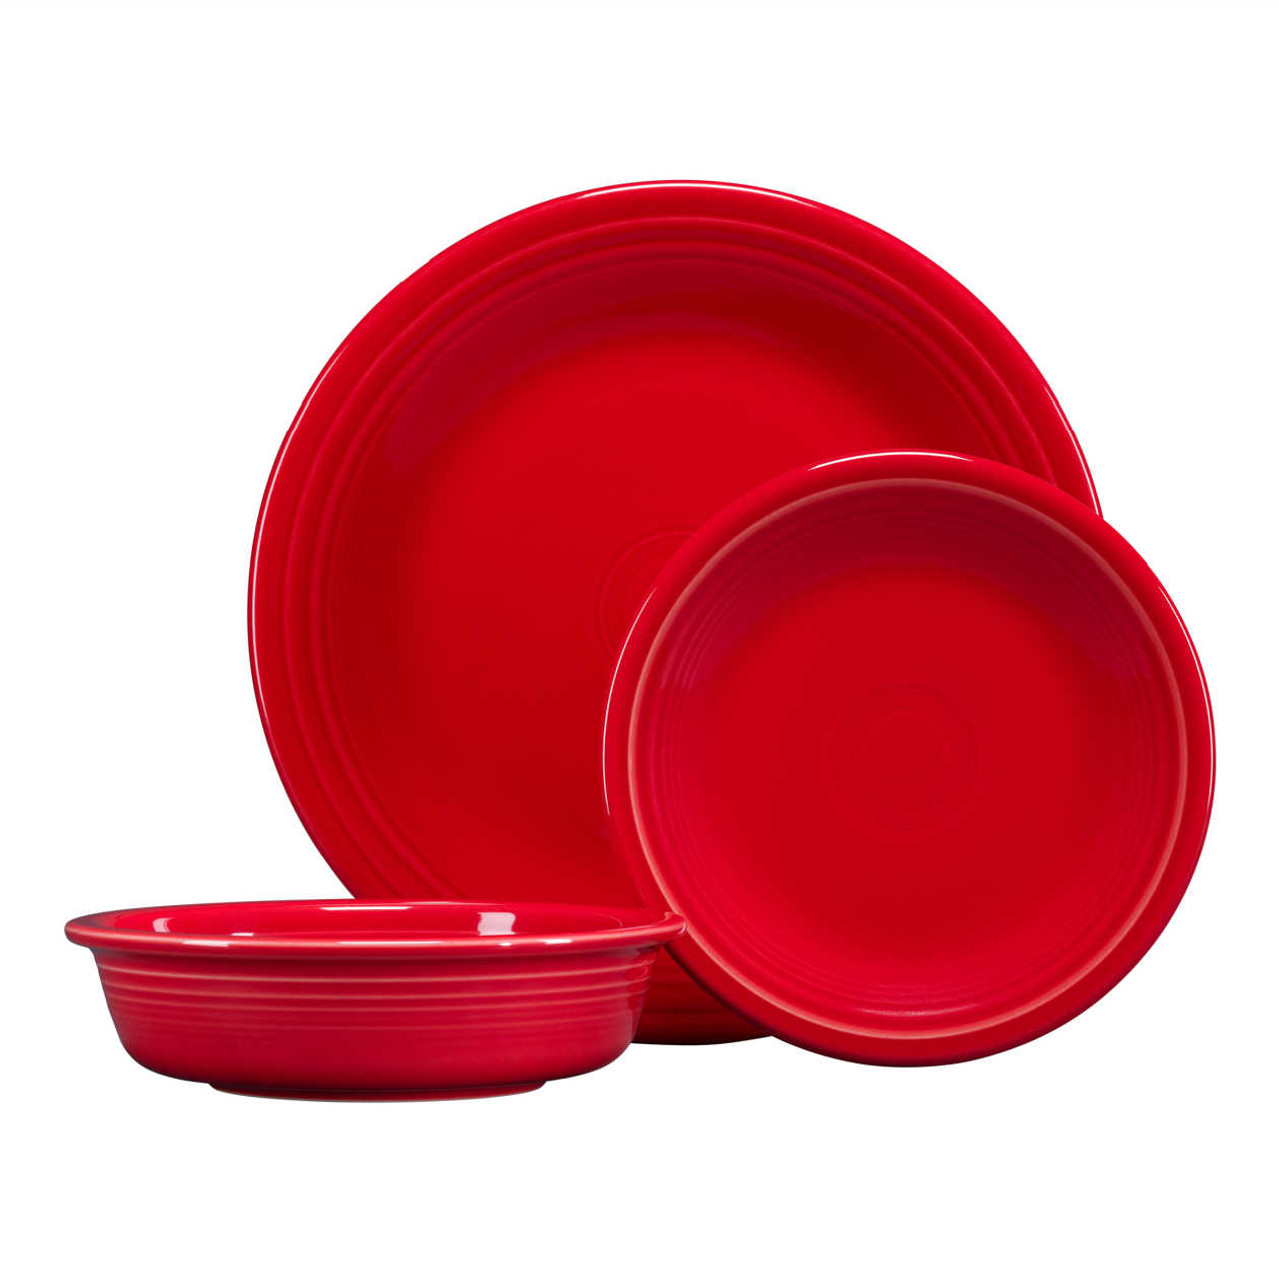 https://cdn11.bigcommerce.com/s-hccytny0od/images/stencil/1280x1280/products/5256/22839/Fiesta_3-Piece_Classic_Place_Setting_in_Scarlet__17672.1676490391.jpg?c=2?imbypass=on